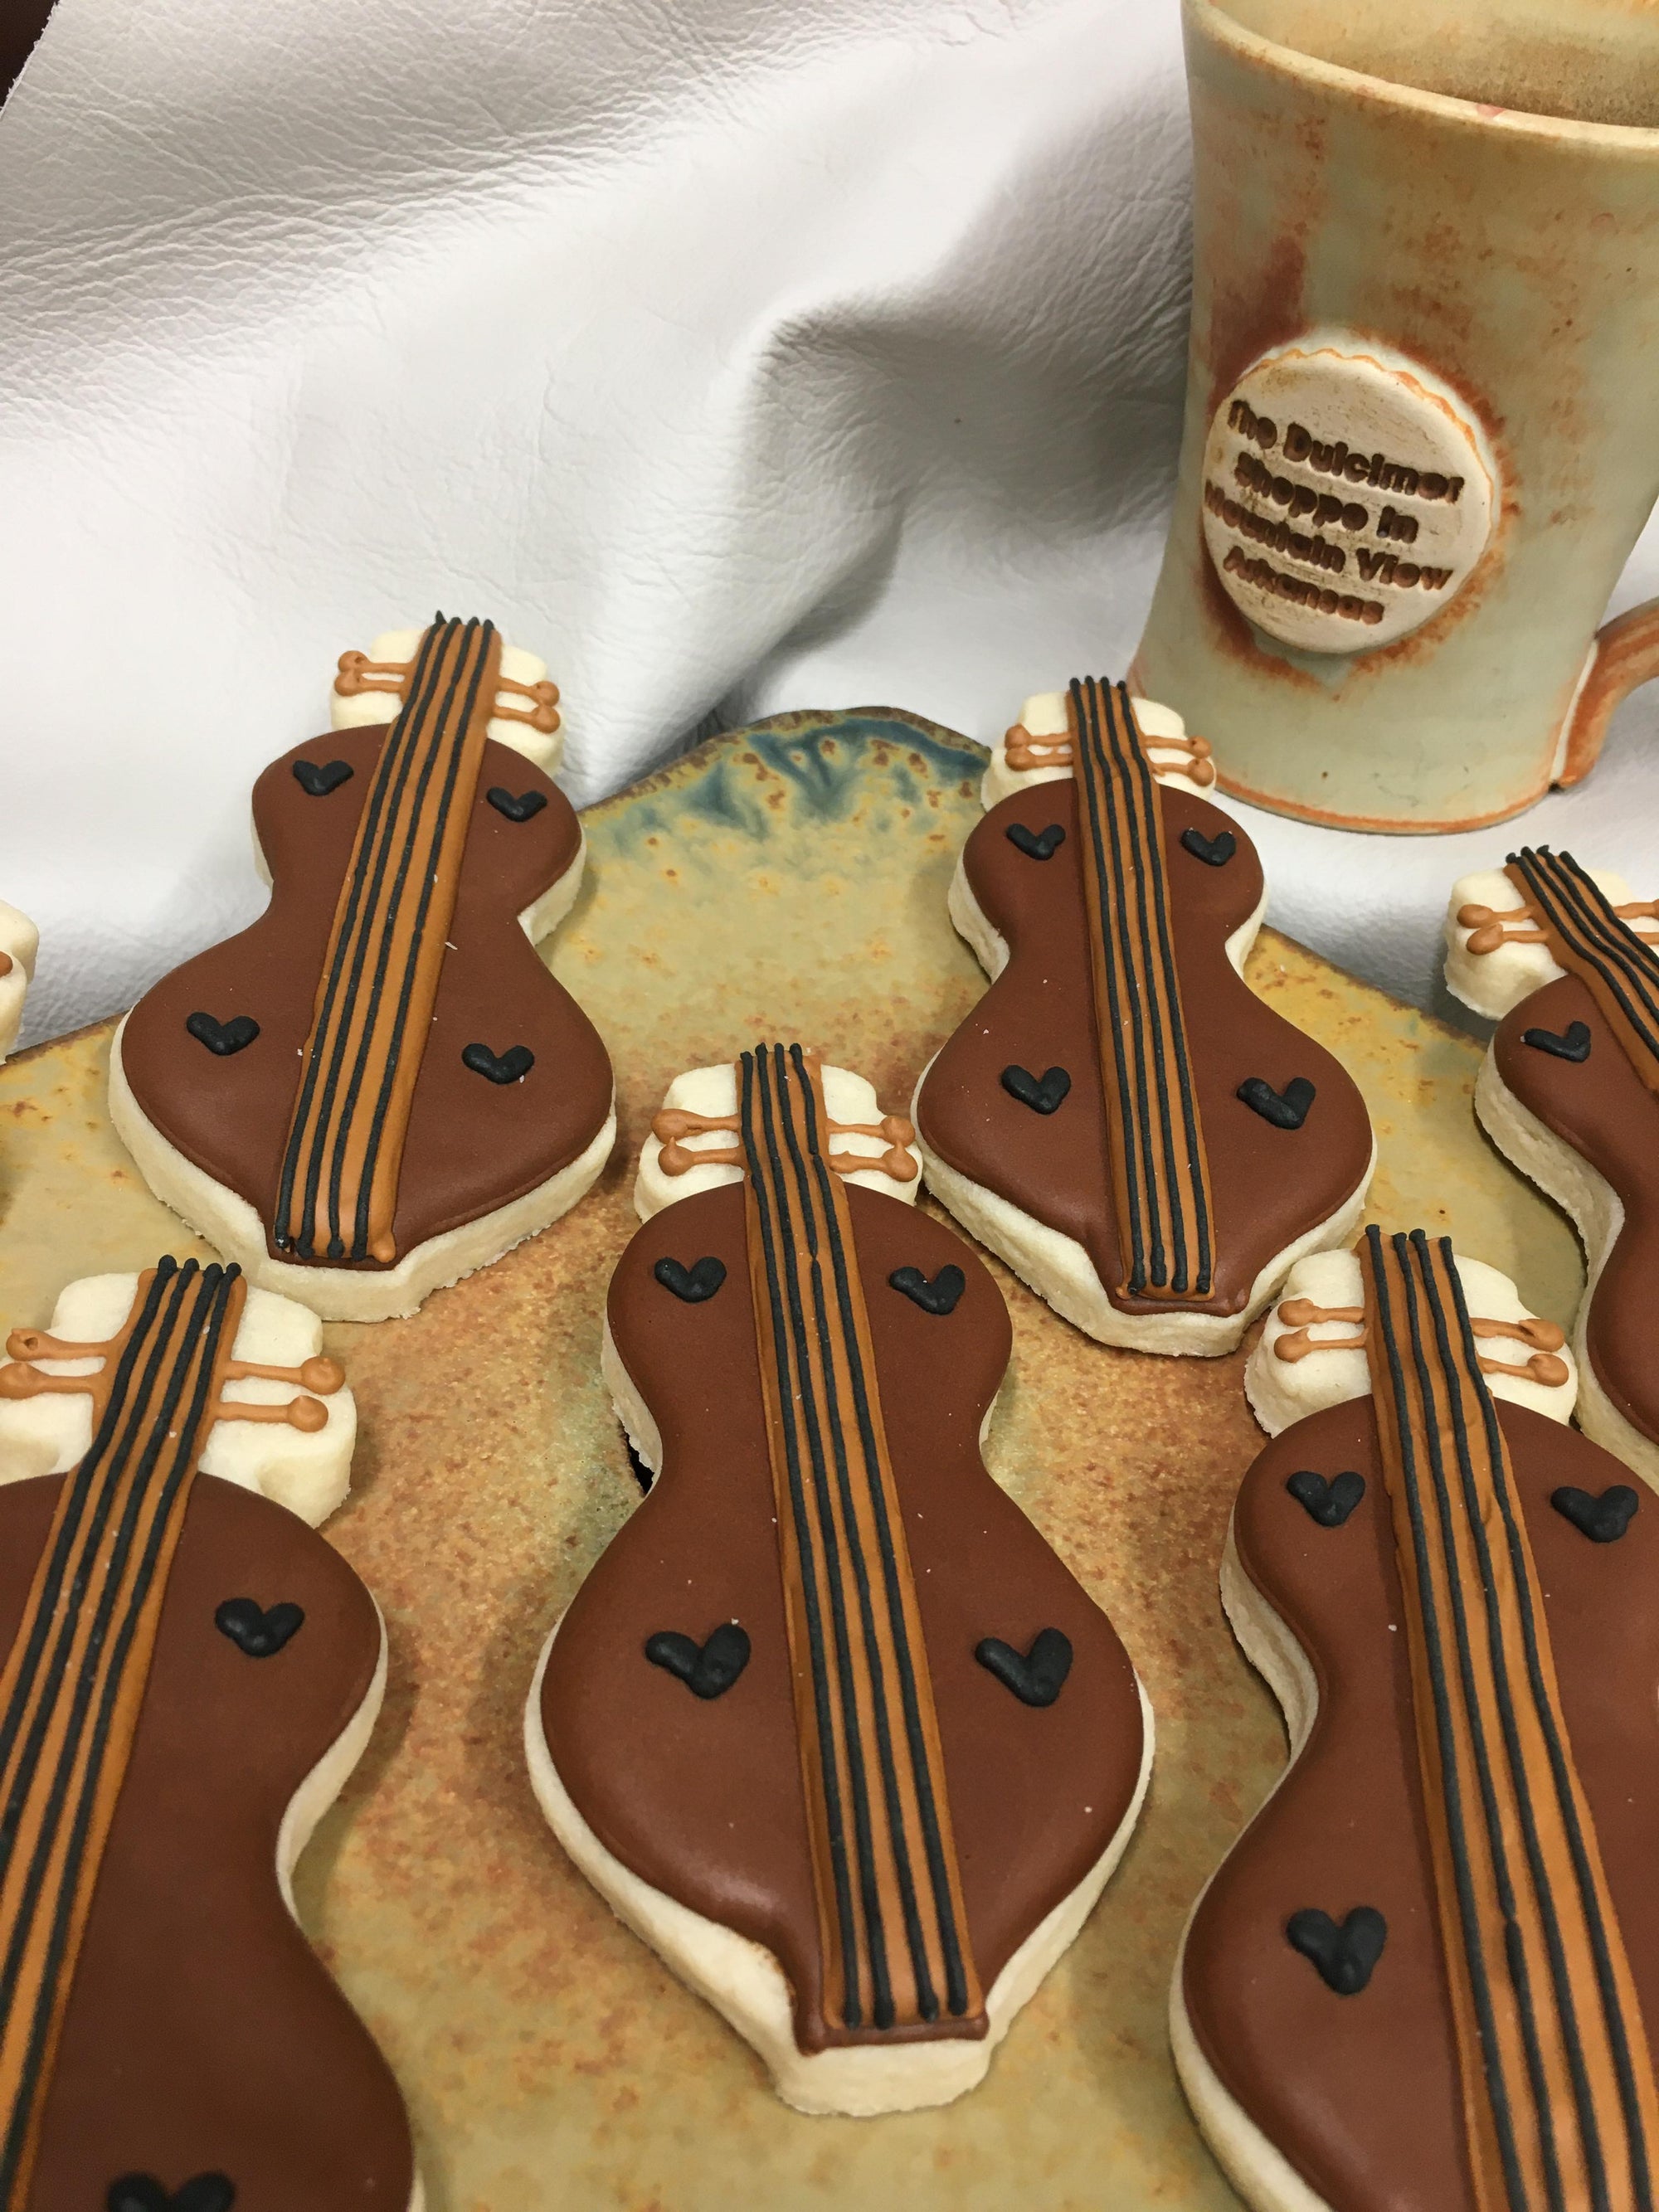 A plate of cookies with a dulcimer cookie cutter on it, showcasing baking skills.